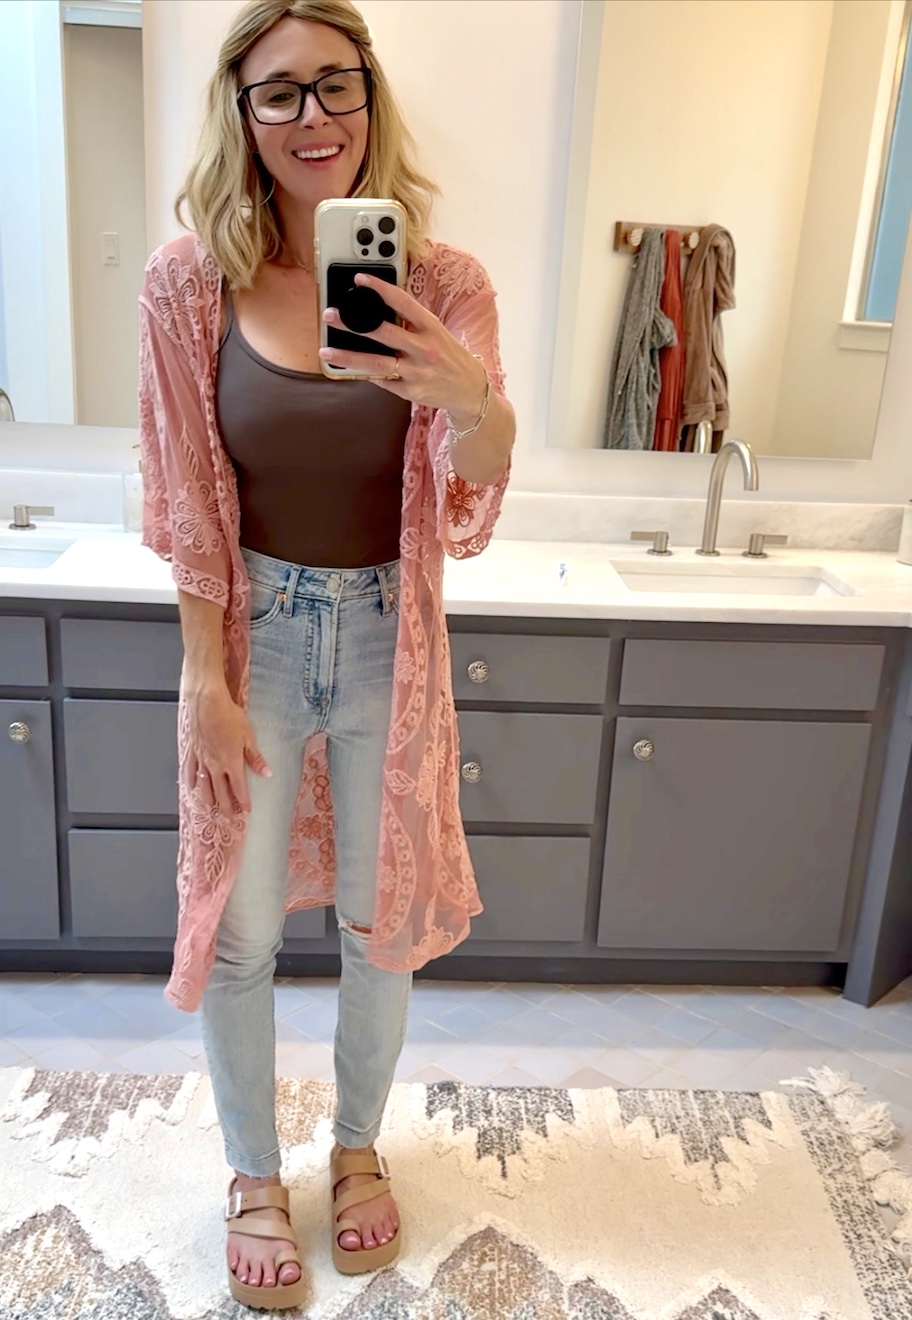 woman taking selfie in mirror wearing pink lace cover up with jeans